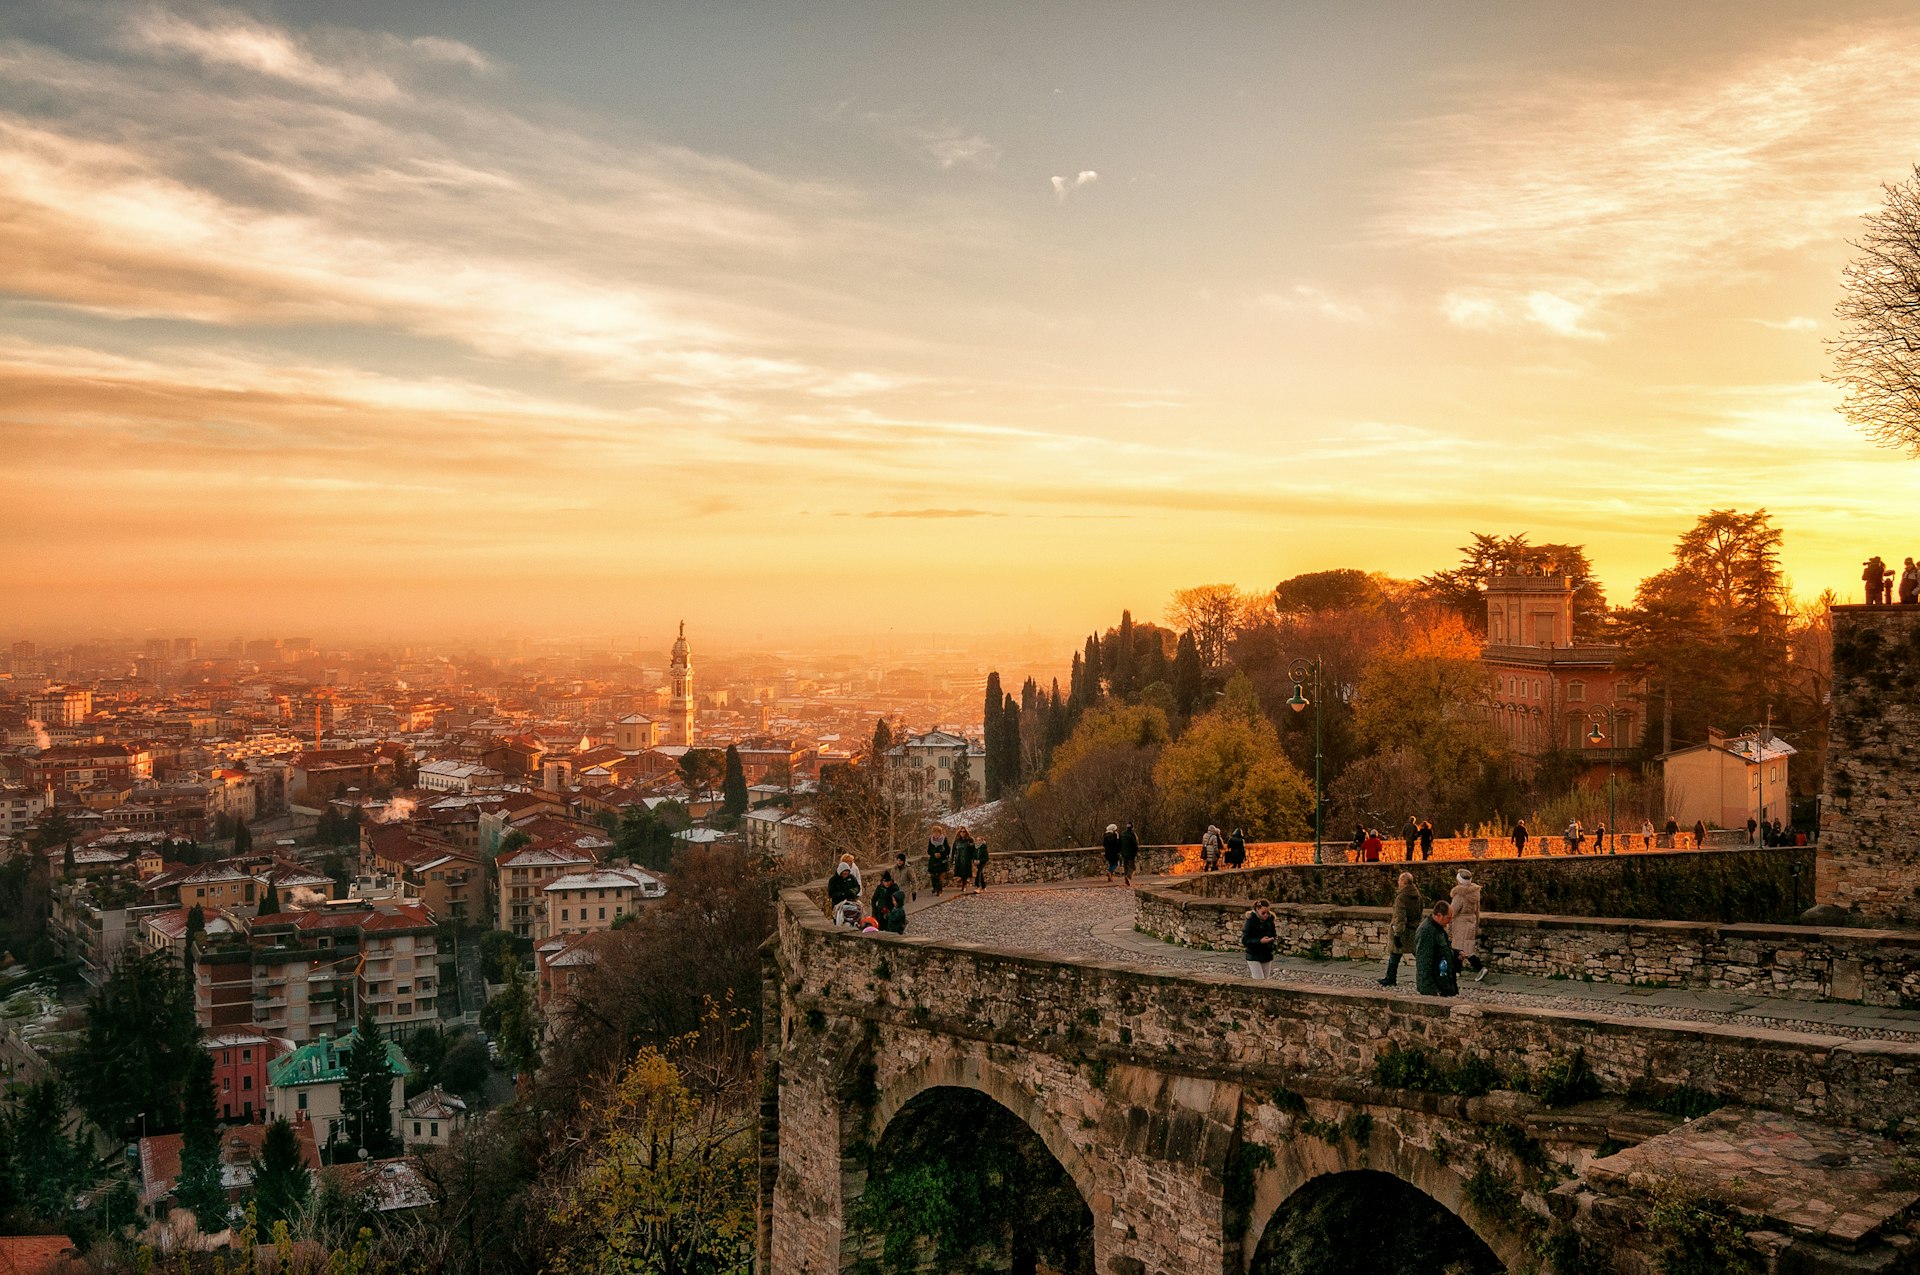 View of Bergamo, Italy in the sunset light